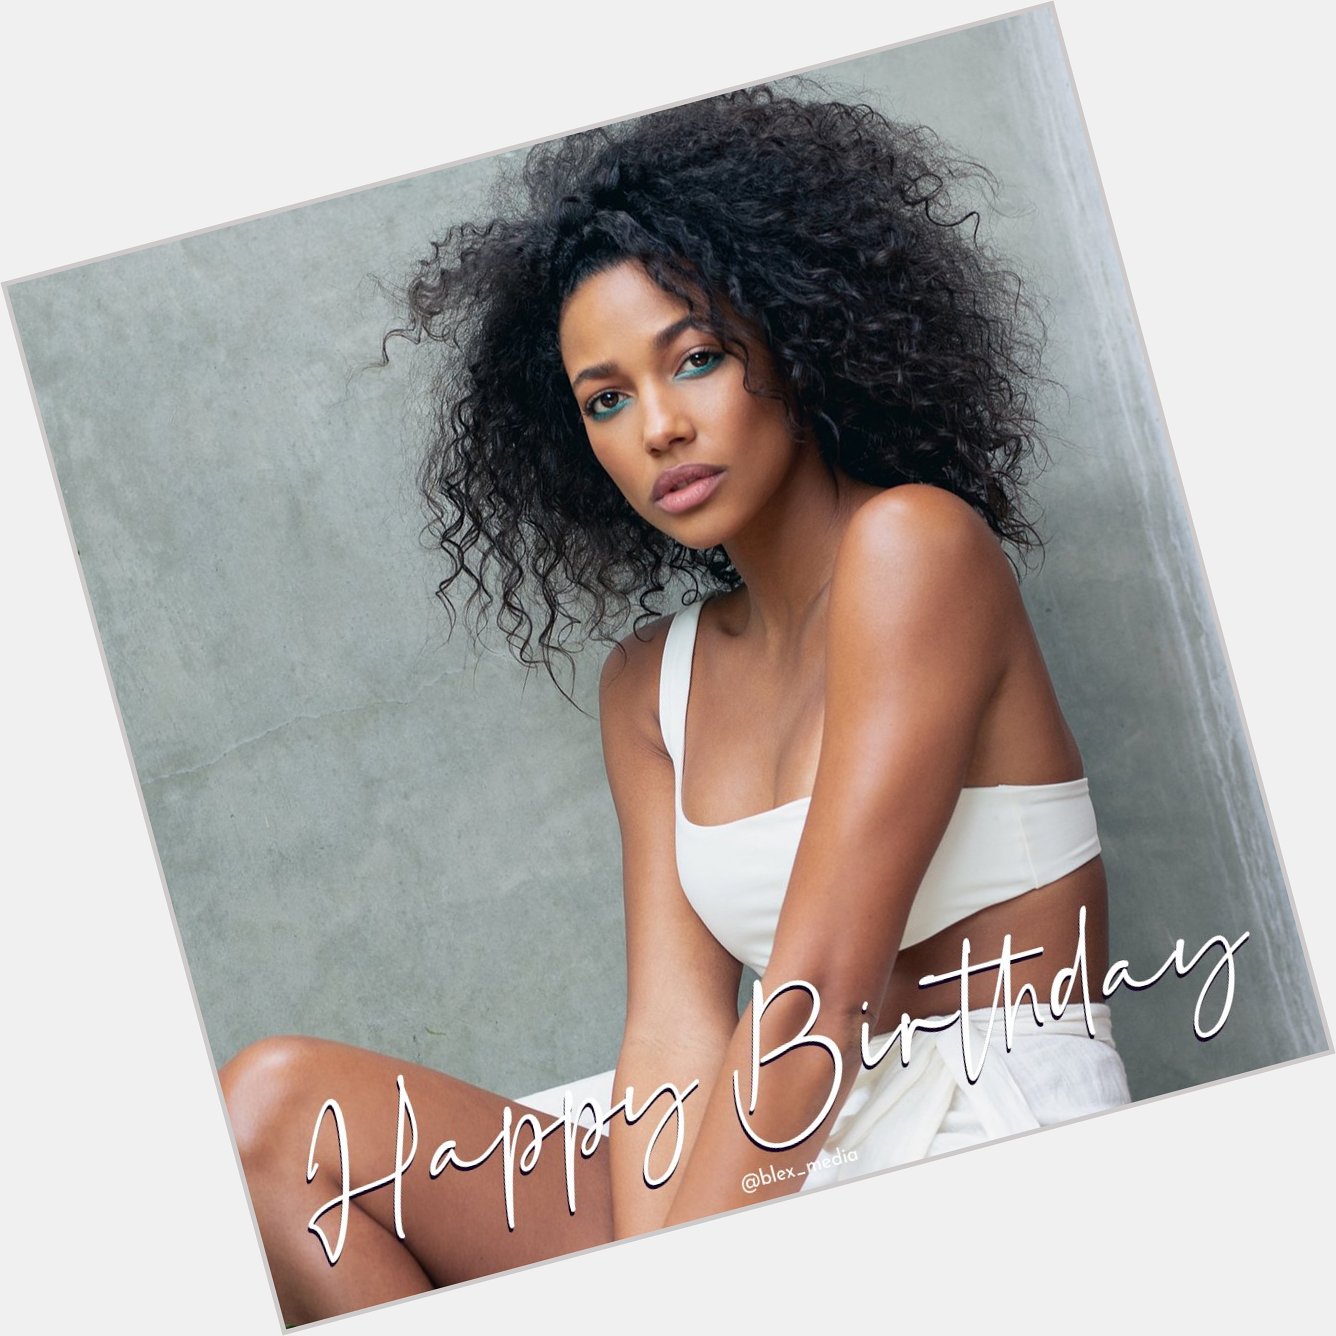 Happy Birthday Kylie Bunbury! You can currently catch her in \Big Sky\ on ABC. 